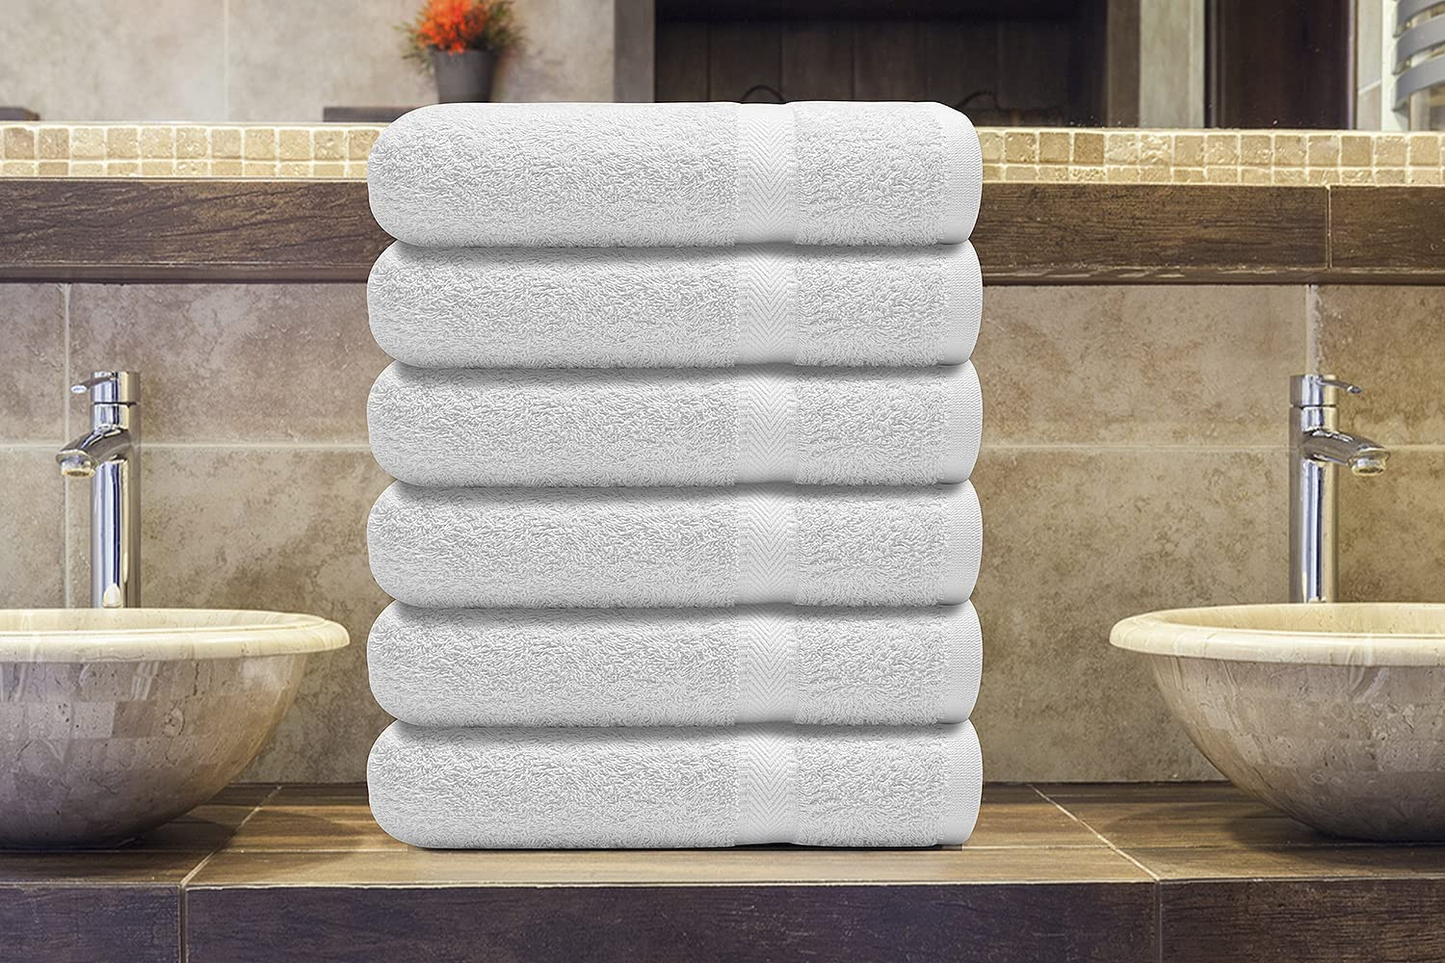 Cotton Bath Towels Set Ultra Soft Cotton Large Bath Towel White Highly Absorbent Quick Dry Daily Usage Home and Kitchen Bath Towel Set- White 24Inch X 48Inch Pack of 6, 24X48-Pack of 6